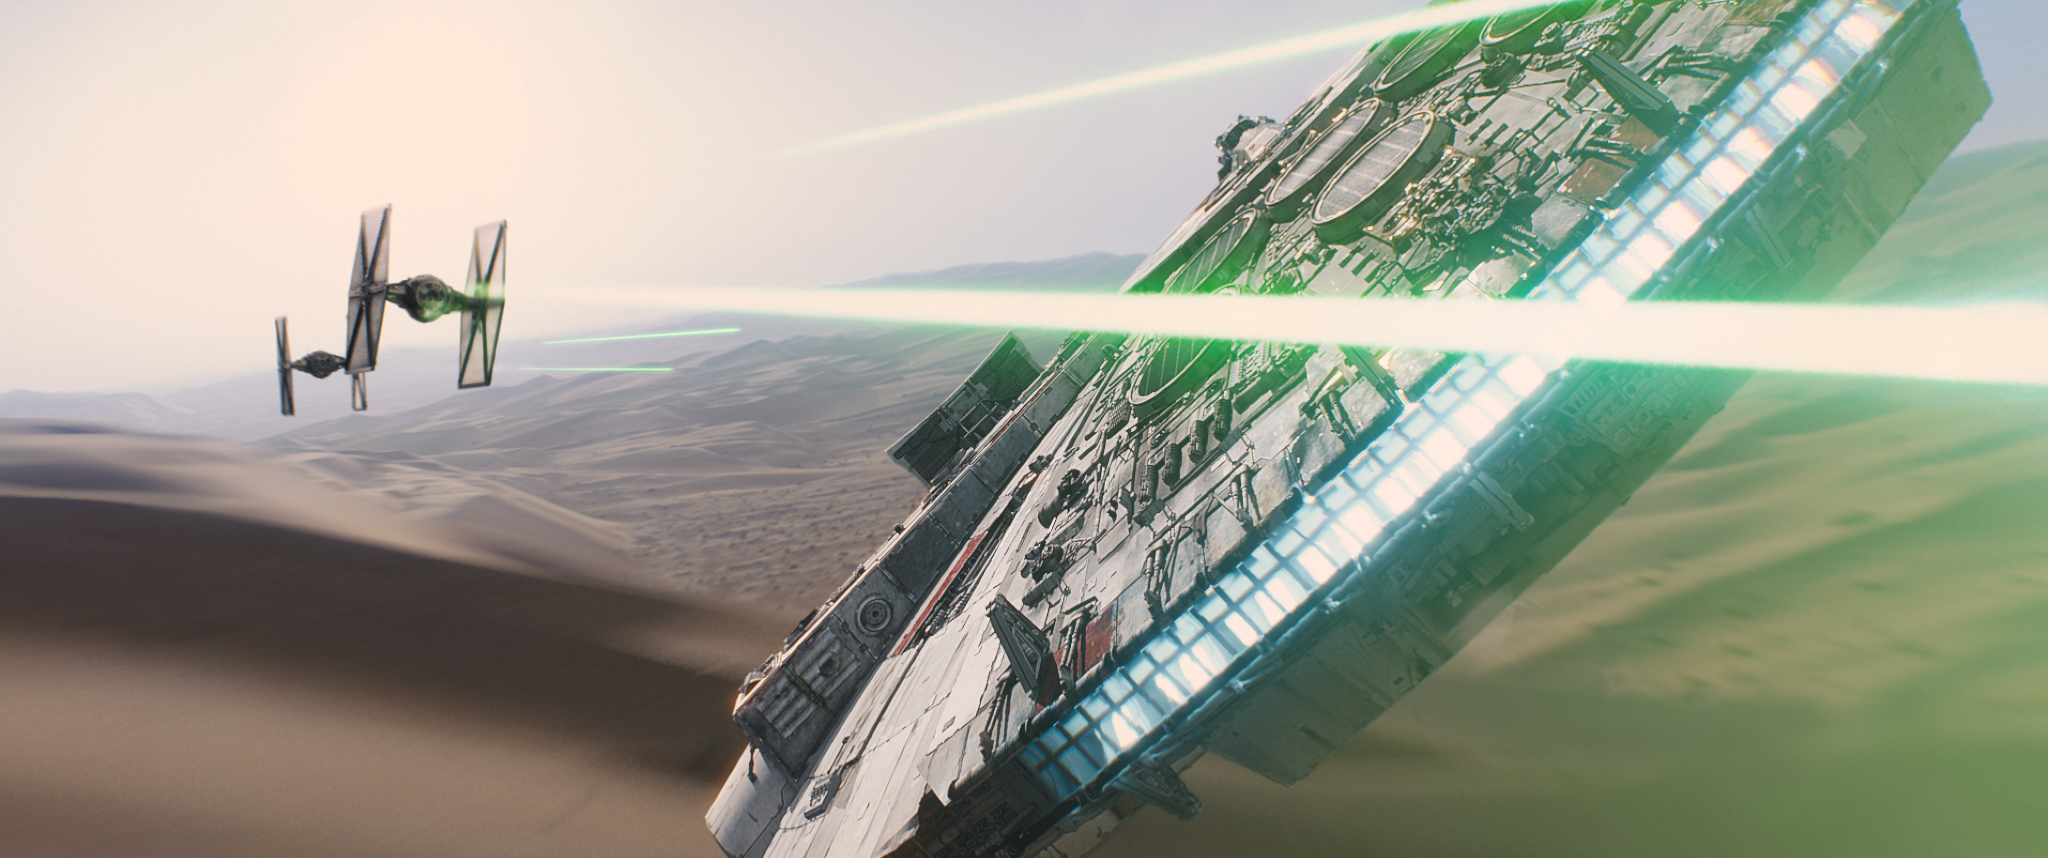 The Millennium Falcon takes on tie fighters in a scene from 'Star Wars: The Force Awakens.' Credit: Disney